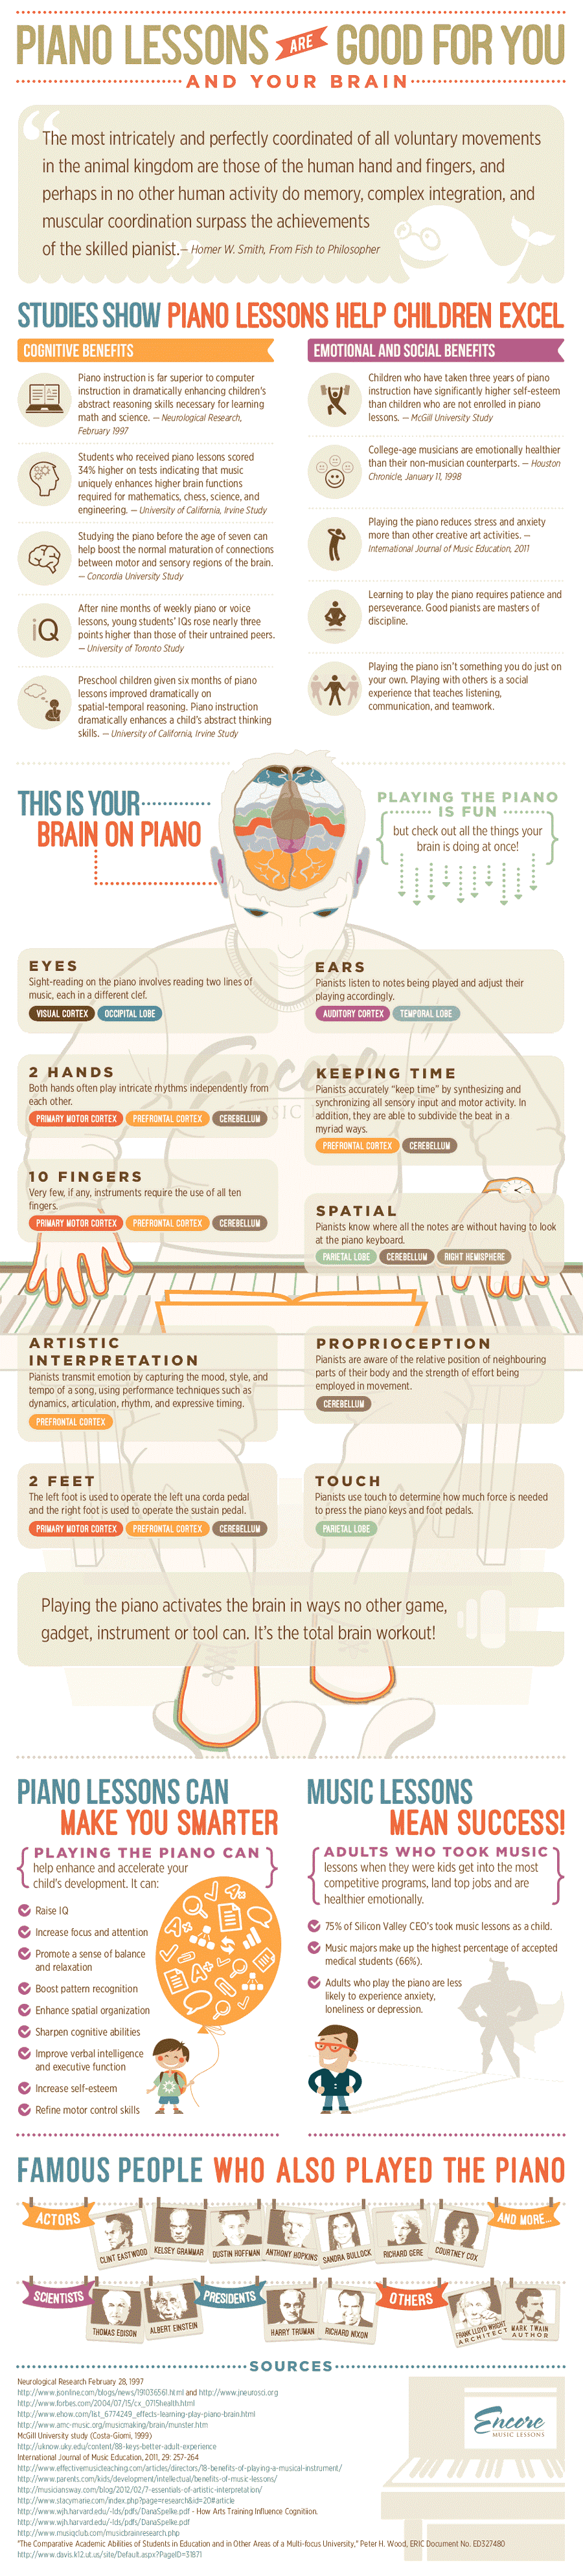 Why playing piano is good for you